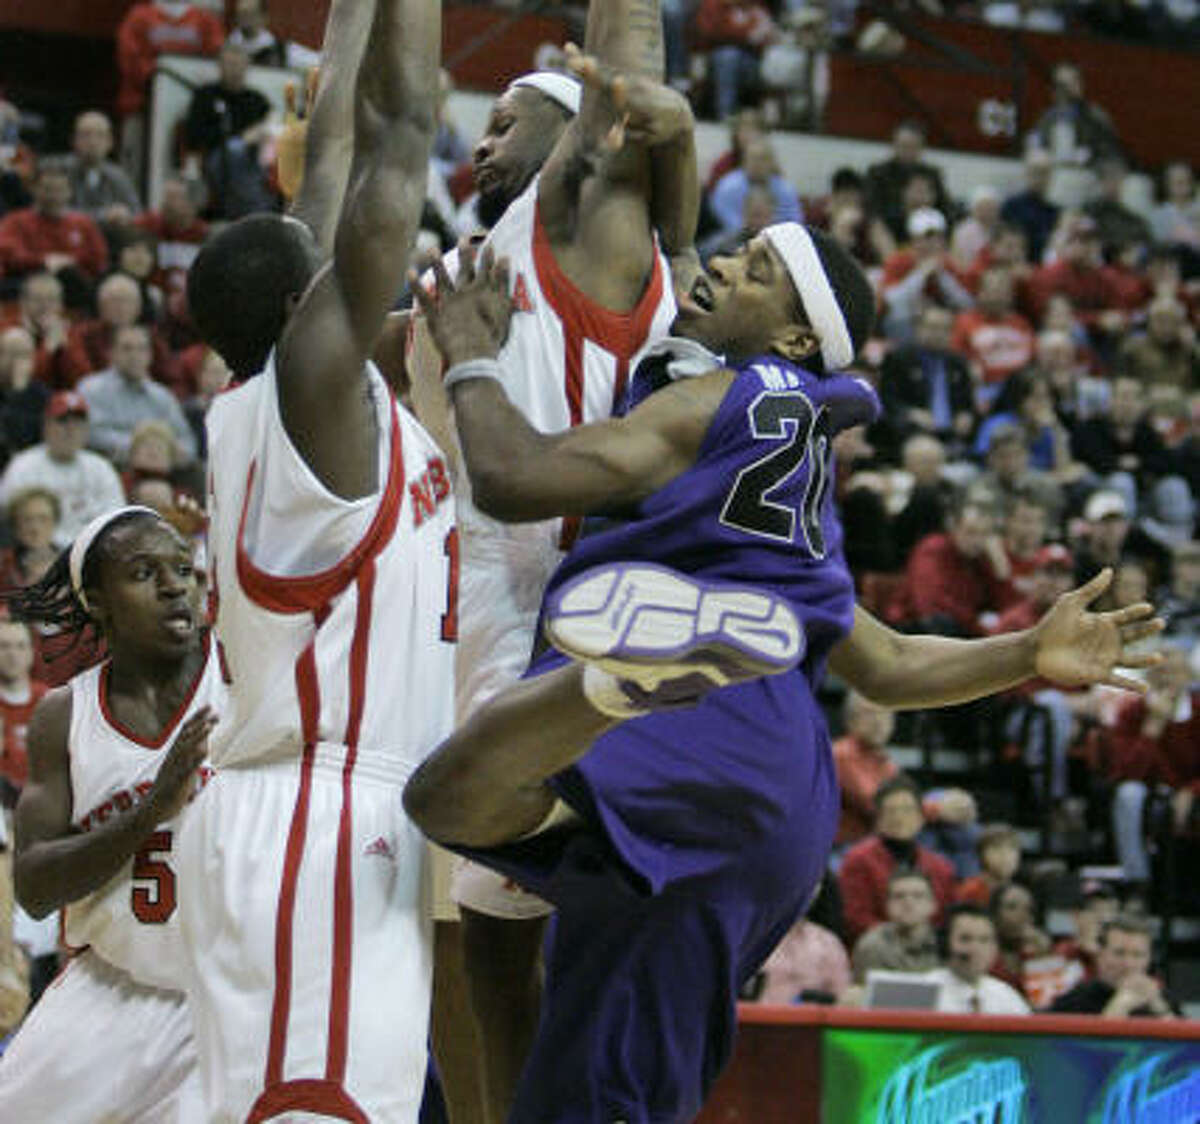 Kansas State's Cartier Martin (right) fouled out against Nebraska on Tuesday night.